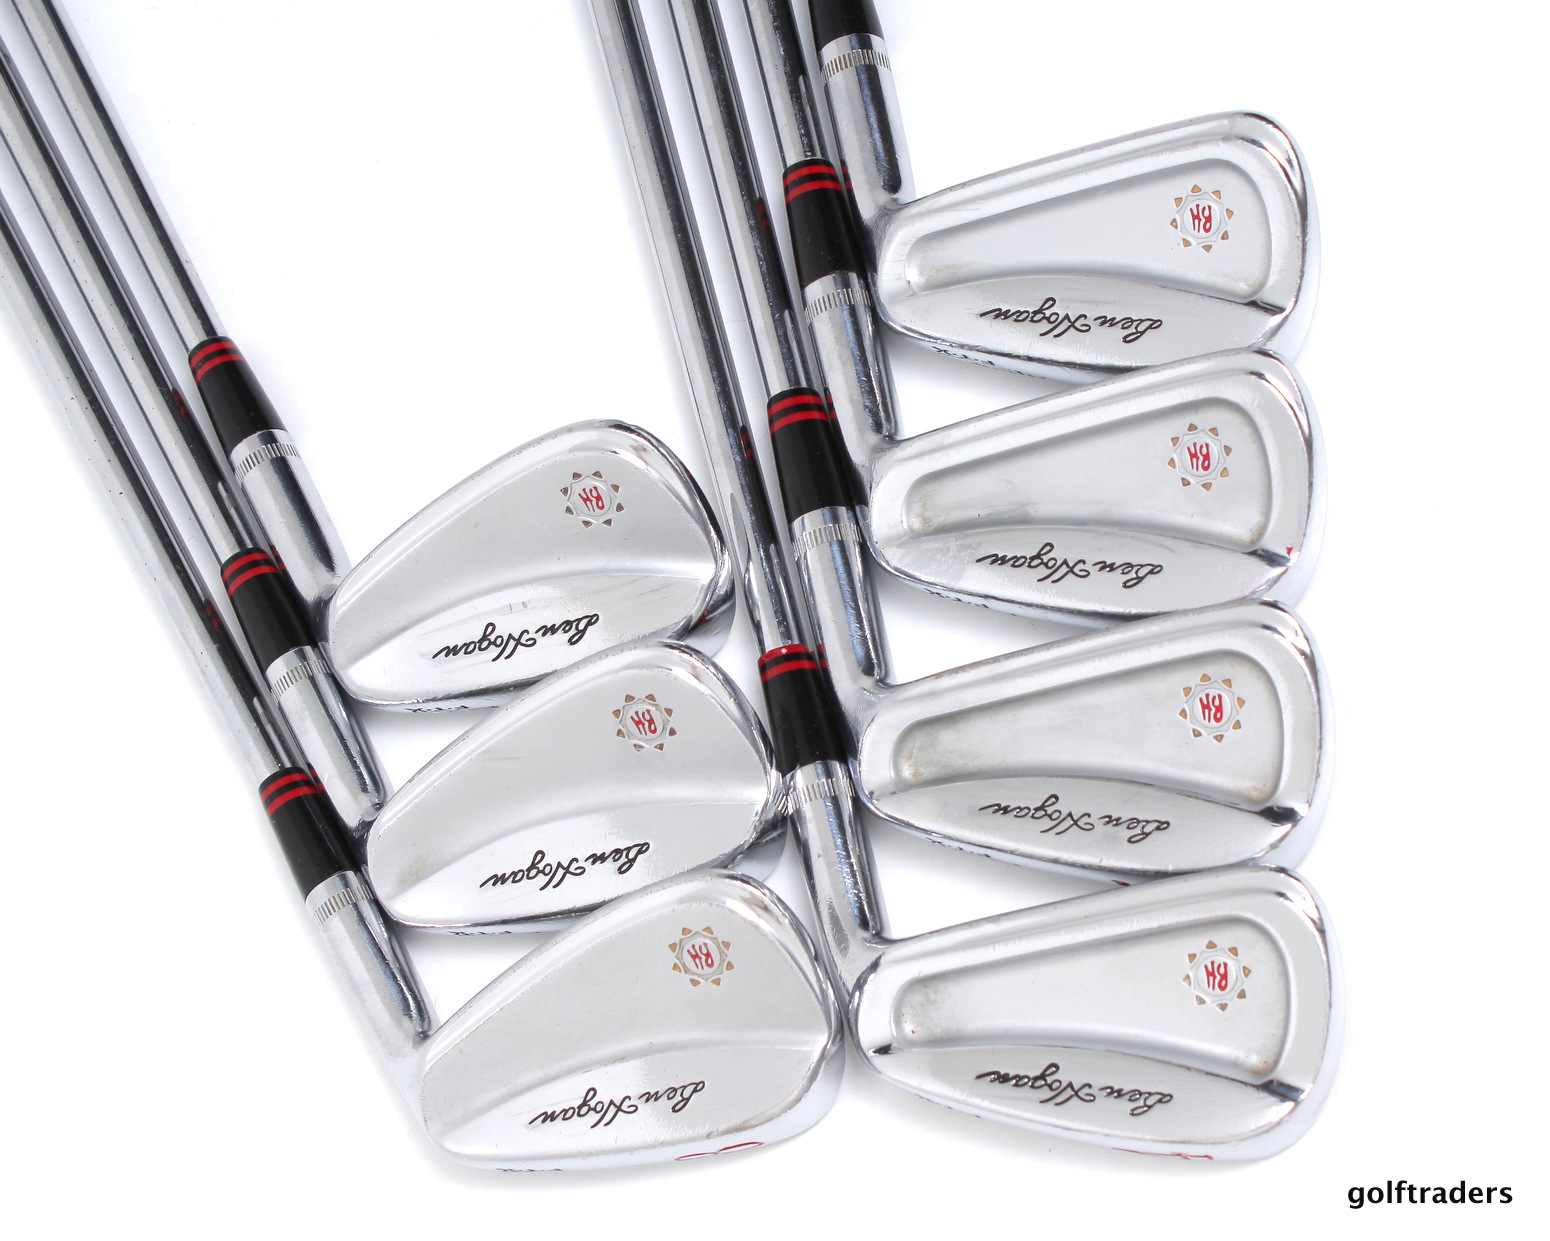 ben hogan apex forged irons review